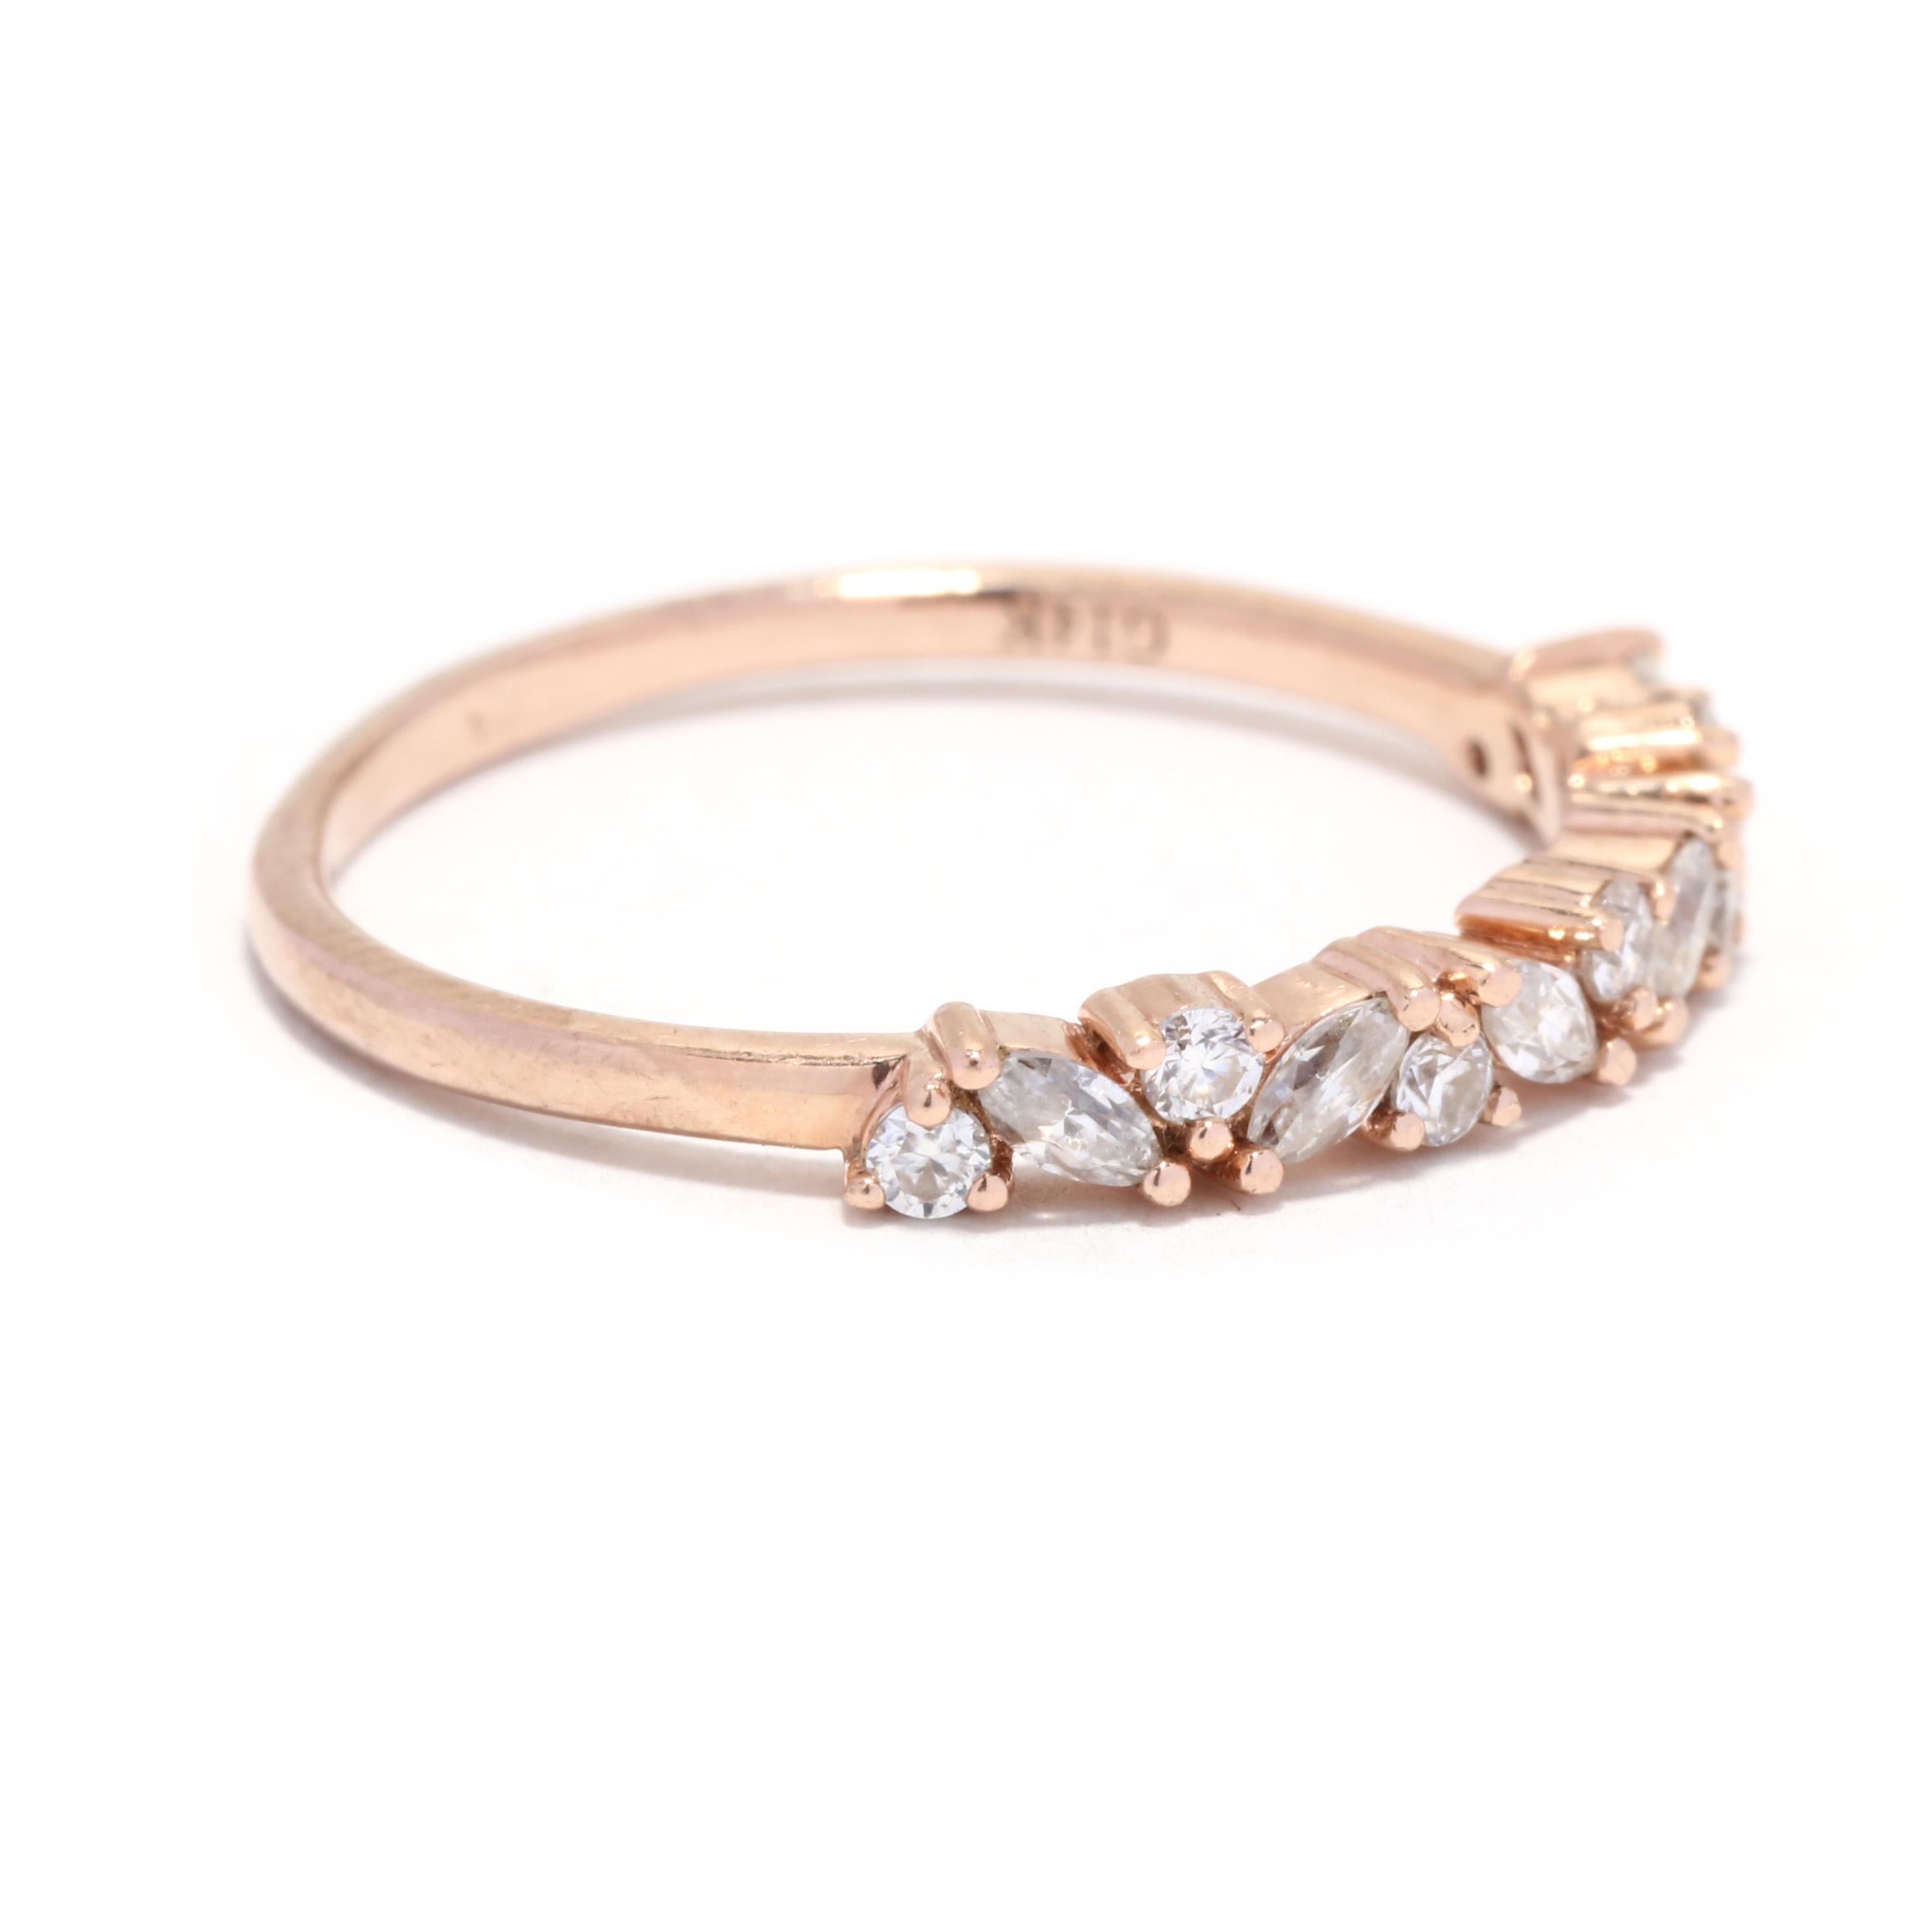 A 14 karat rose gold fancy moissanite wedding band. This stackable moissanite band features alternating marquise and round brilliant cut moissanite stones weighing approximately .25 total carats (diamond equivalent) and with a slightly tapered